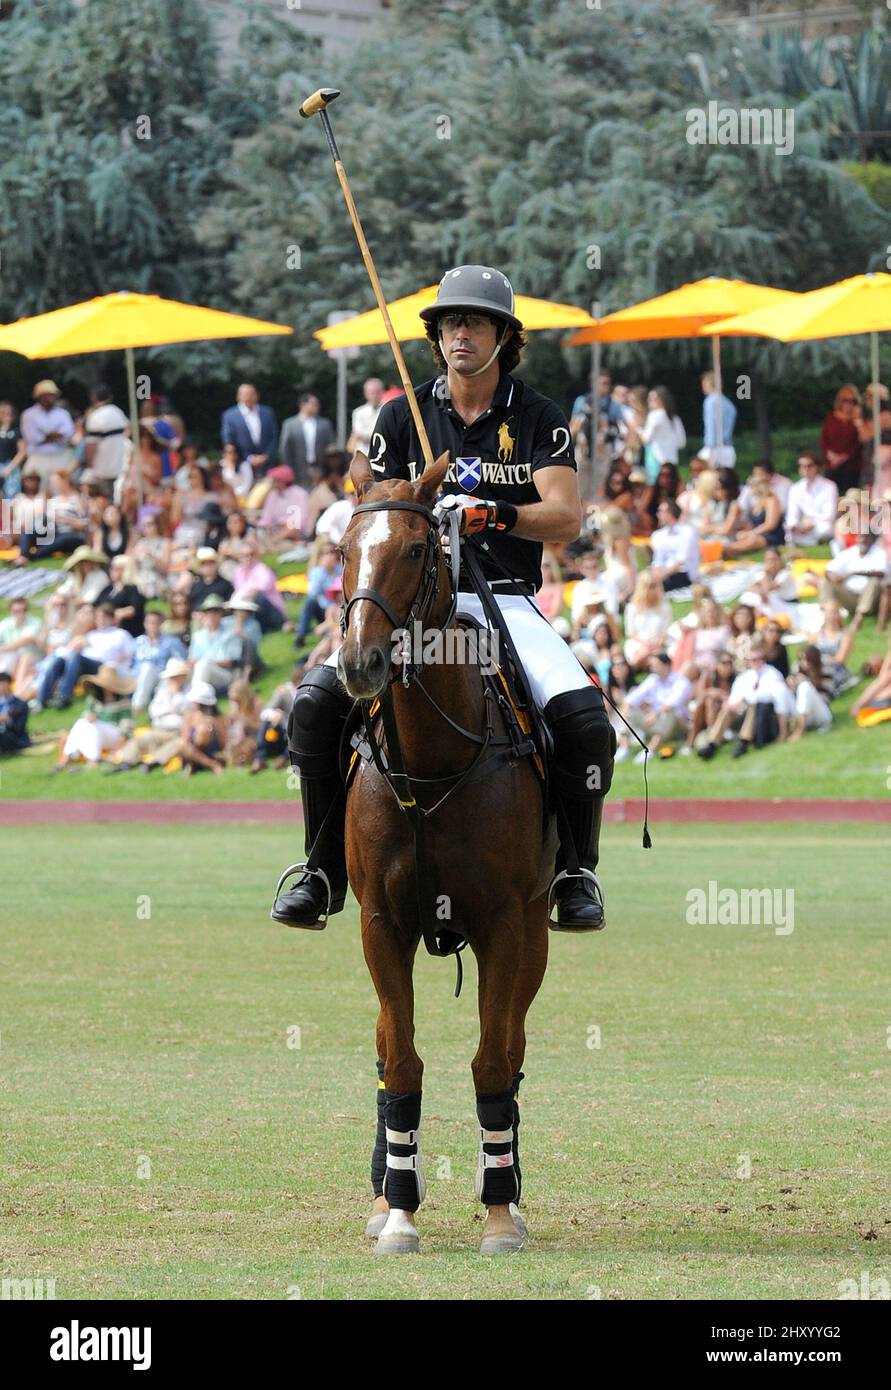 Nacho Figueras attending the 2012 Veuve Clicquot Polo Classic held at Will Rogers State Historic Park in Los Angeles, USA. Stock Photo